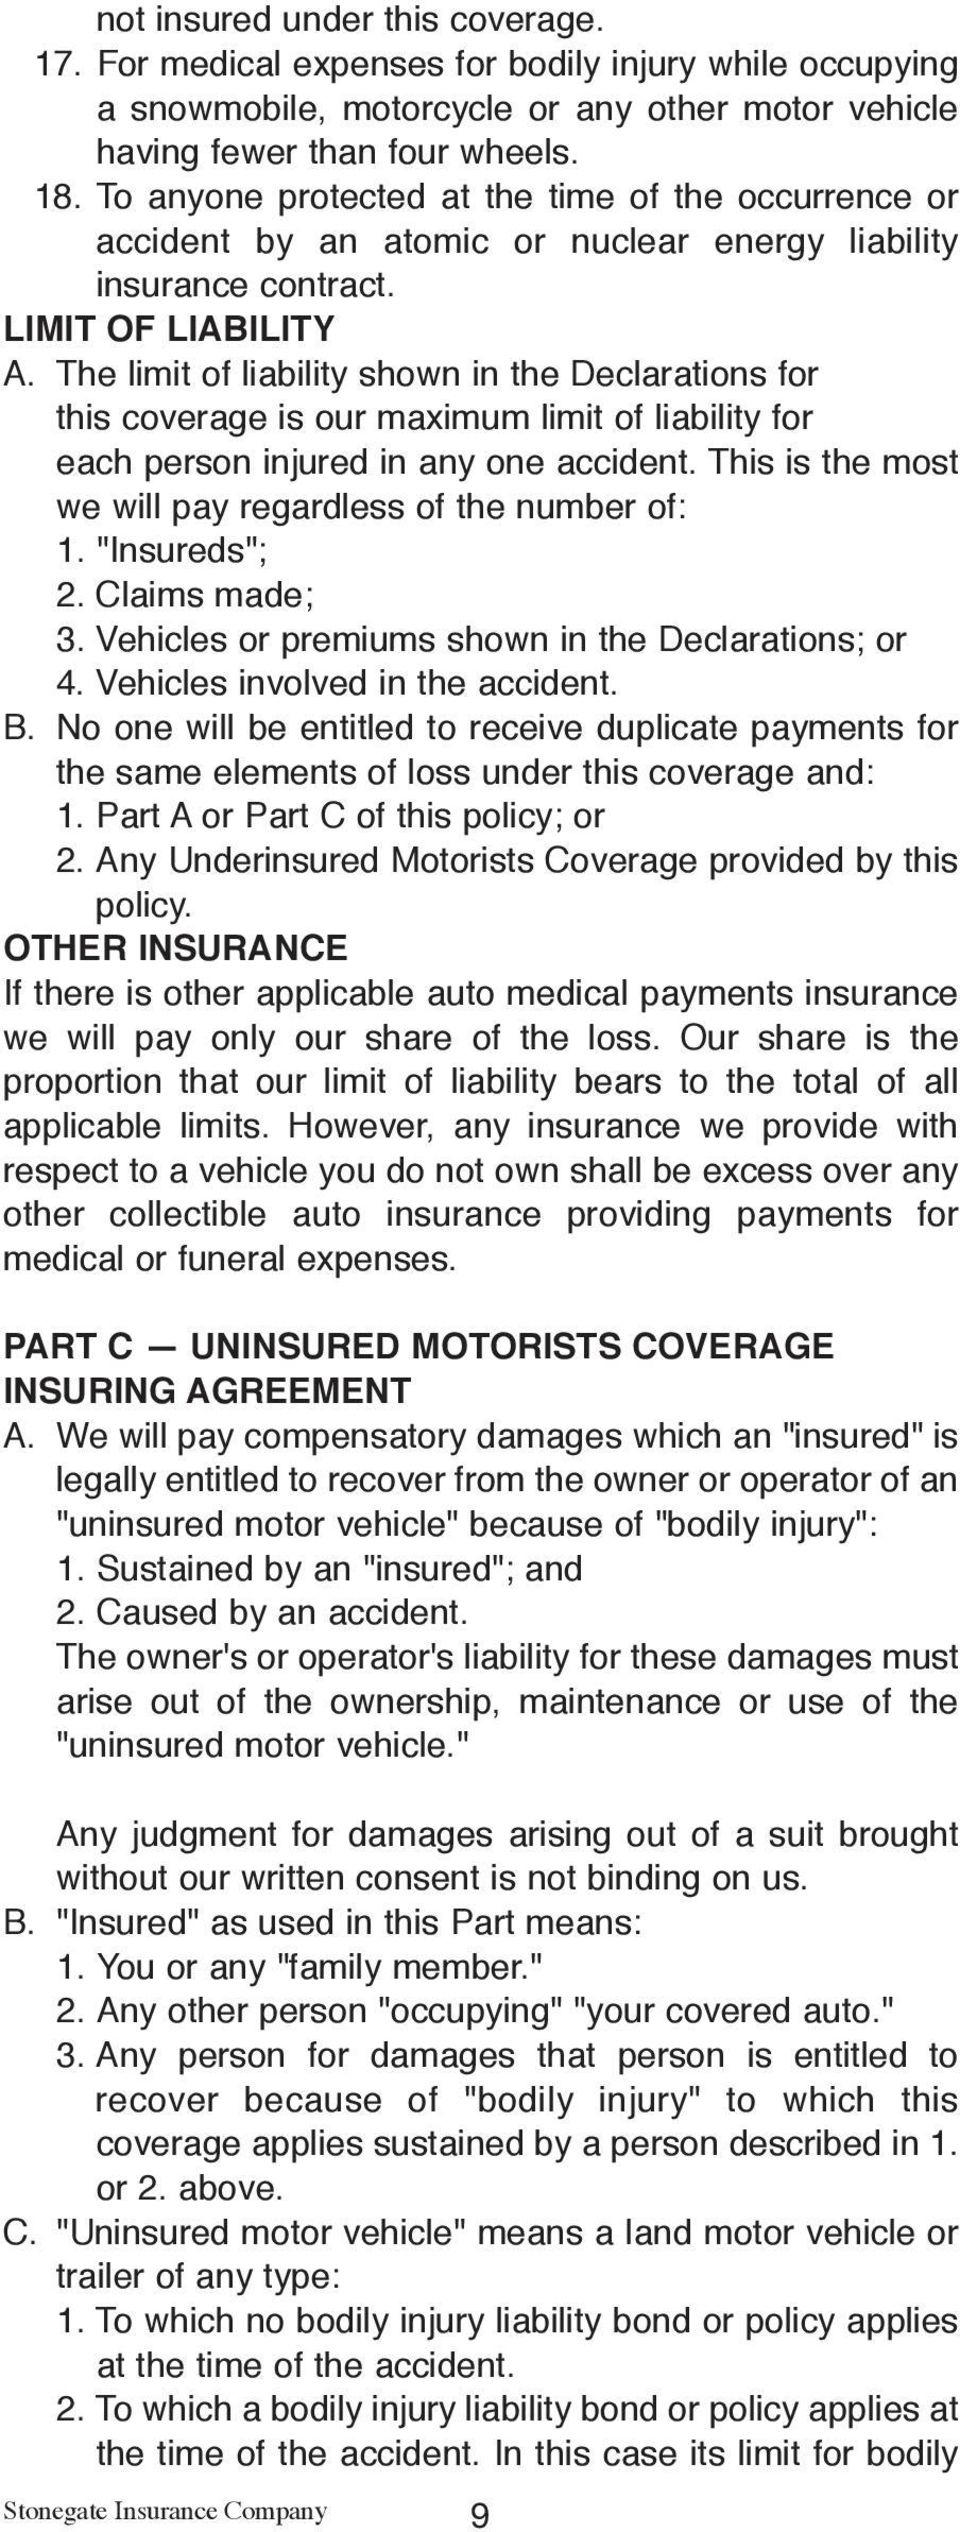 The limit of liability shown in the Declarations for this coverage is our maximum limit of liability for each person injured in any one accident.